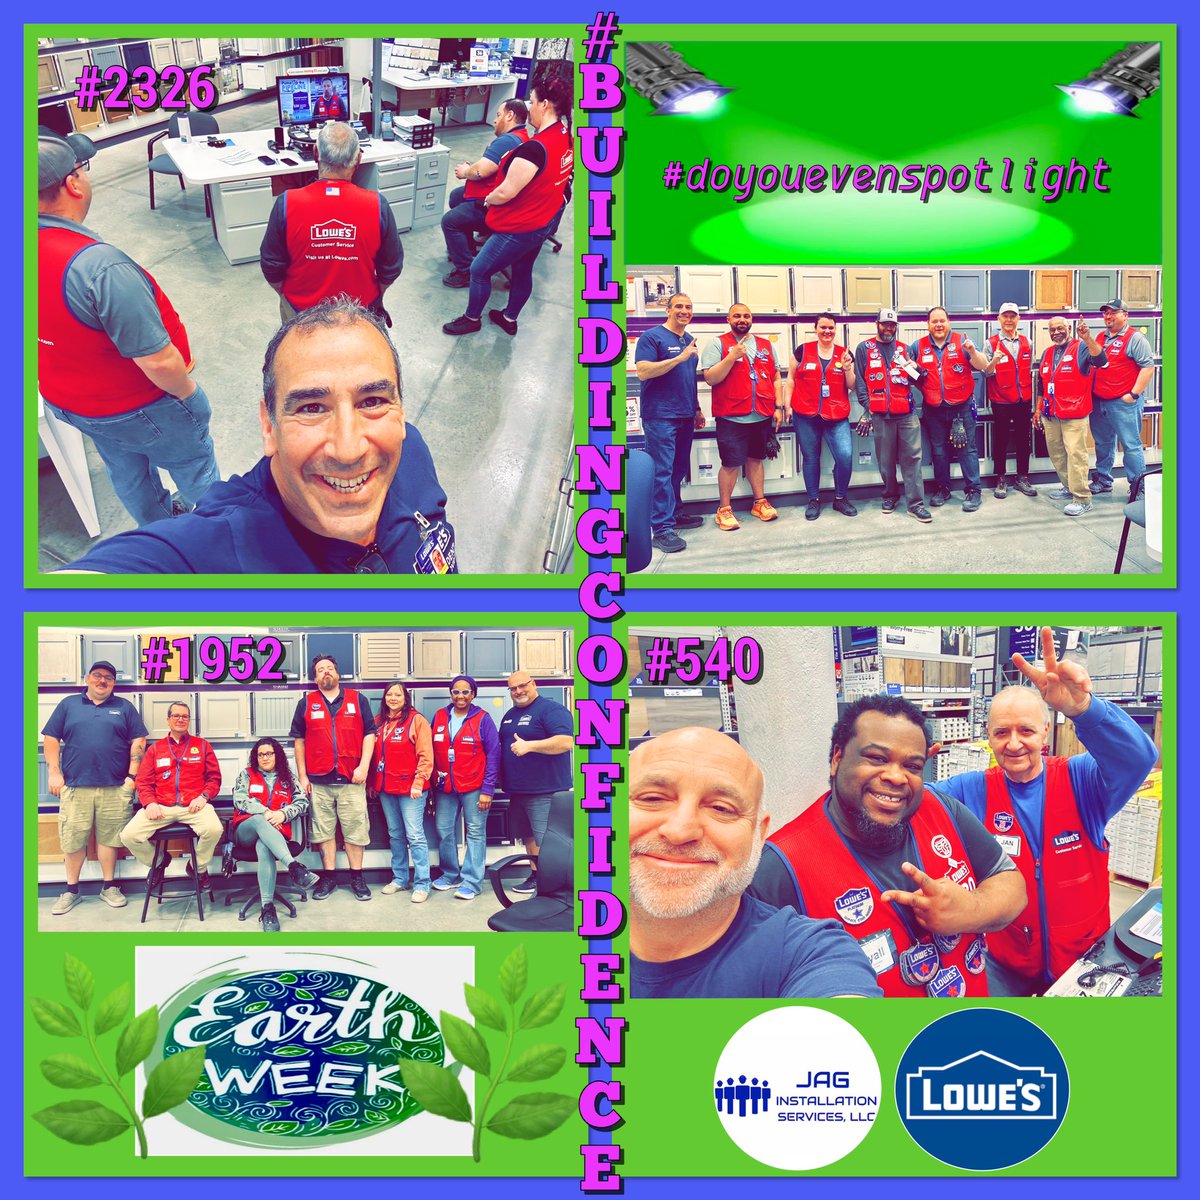 “I start early, & I stay late, day after day after day, year after year. It took me 17 years & 114 days 2 become an overnight success.”#lionelmessi

Week after week, JAG’s #teams generate #hardwork & #dedication at #Lowes #specialtyspotlight in #region18. #heartandhustle=#success